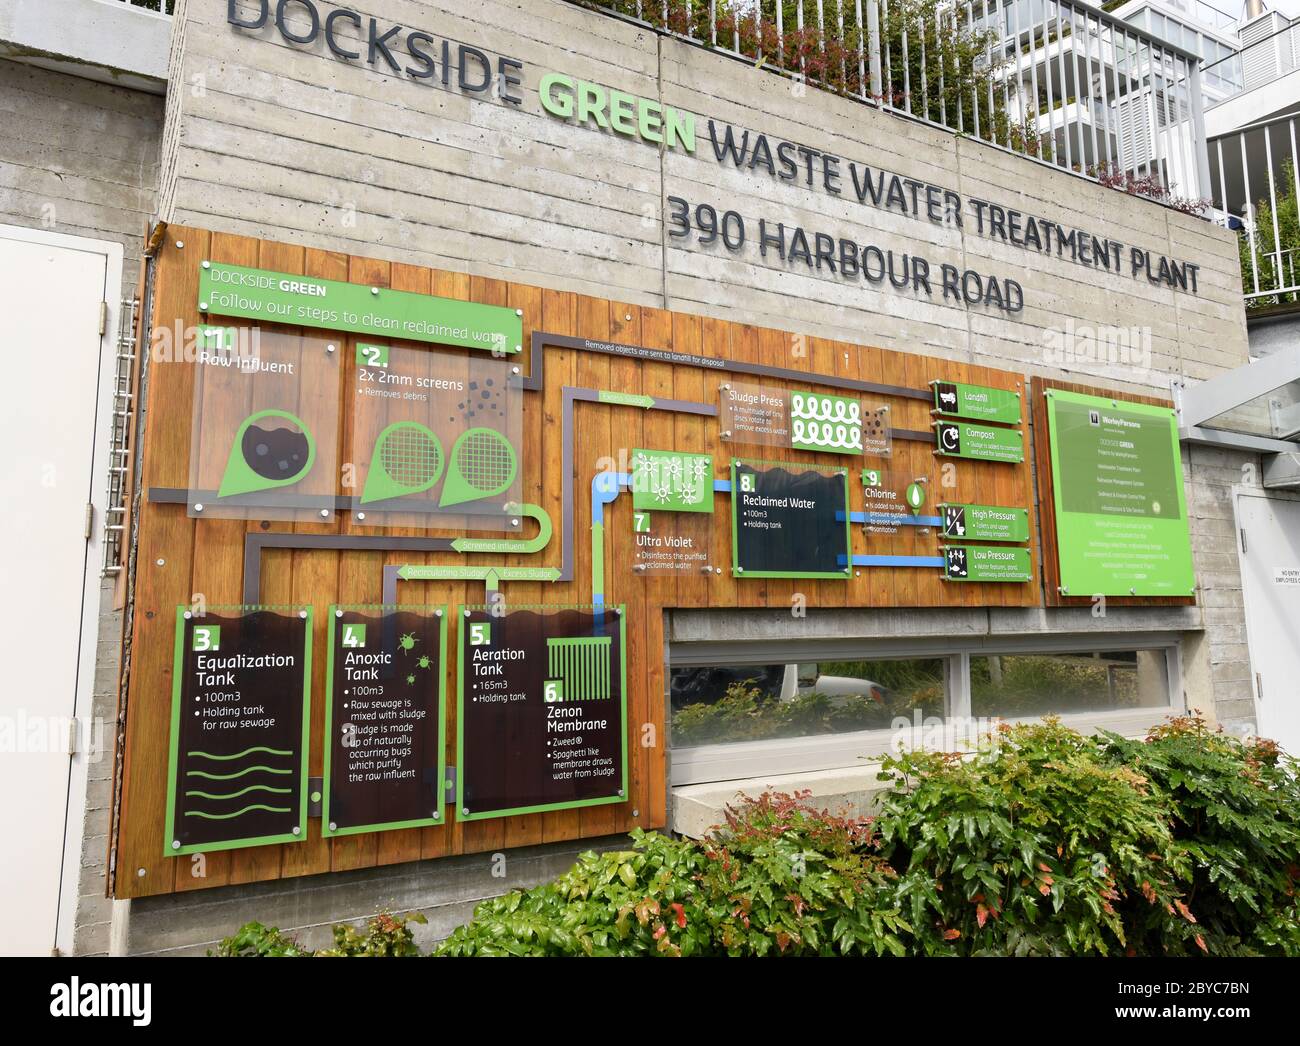 A sign outside the Dockside Green Waste Water Treatment Plant explains how the treatment system works. The plant is a wastewater collection, treatment Stock Photo